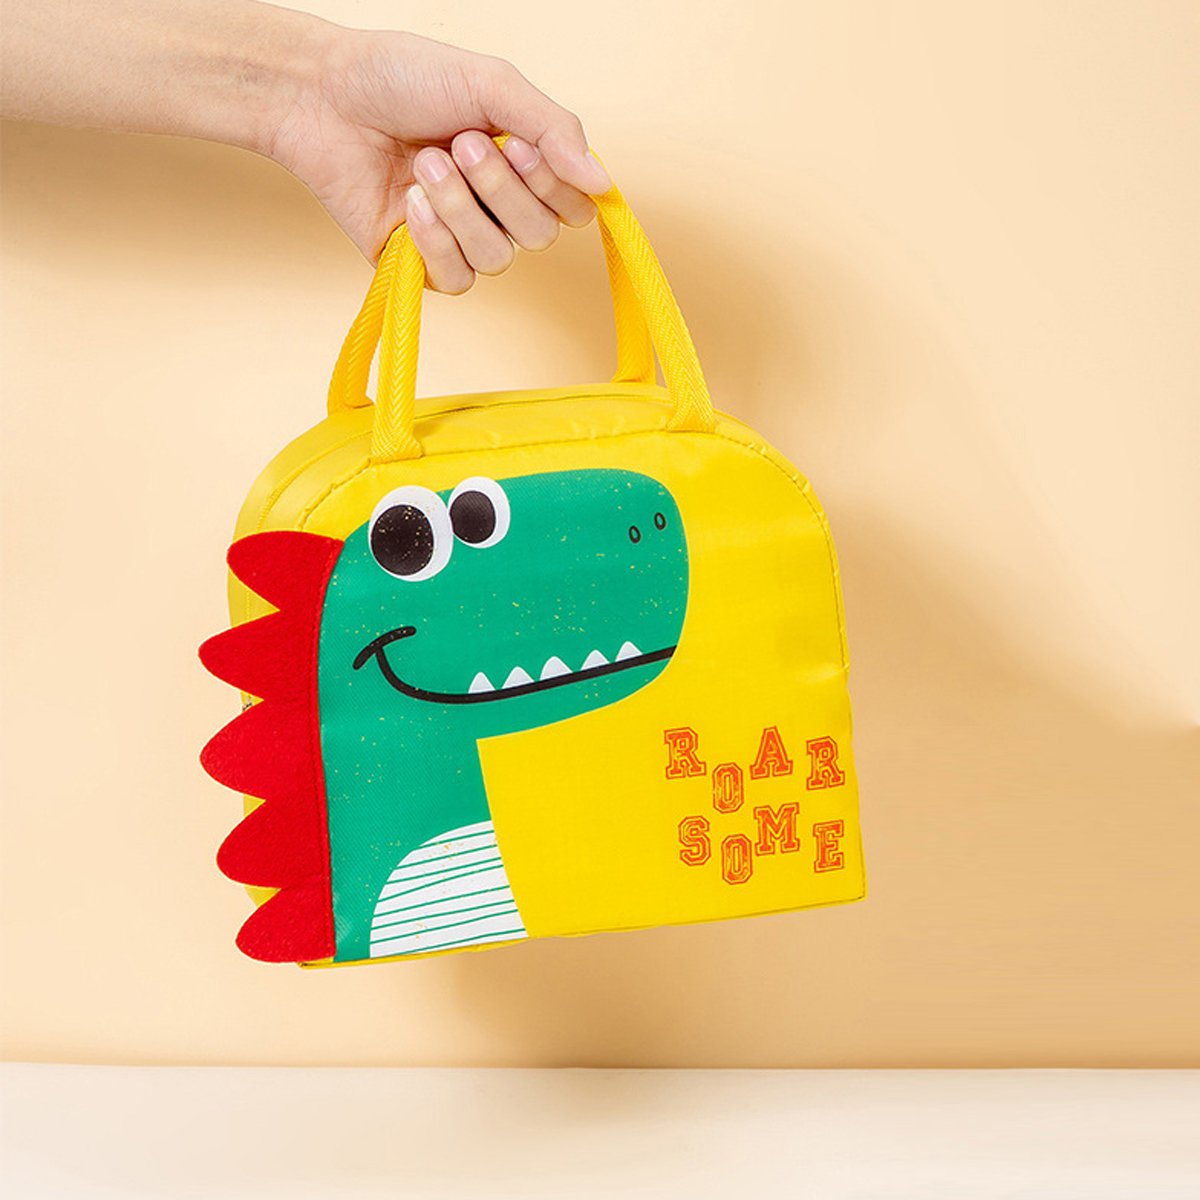 Fun and Functional Cute Lunch Bags for Kids